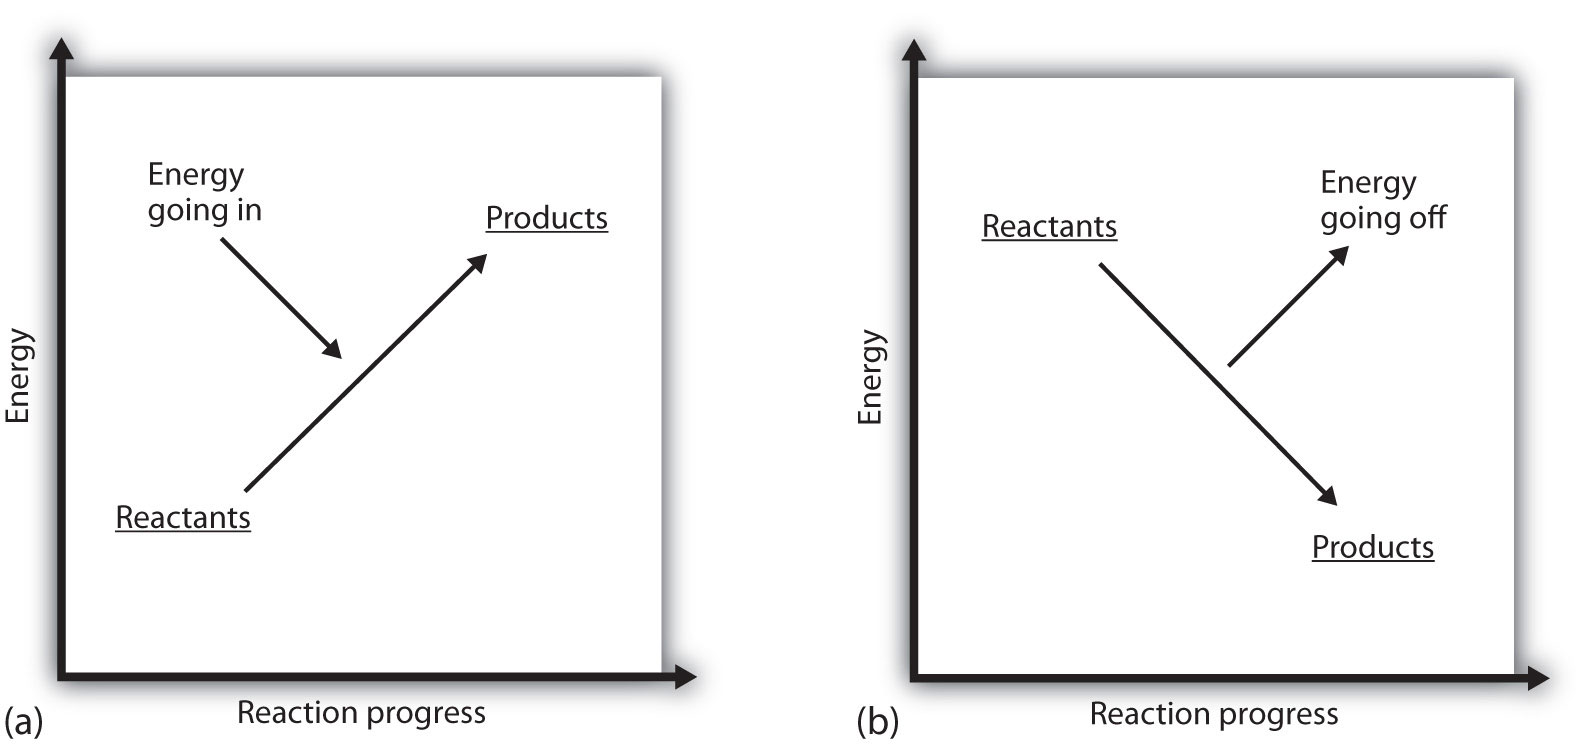 (a)	The endothermic reaction absorbs energy as the reaction takes place. As a consequence, the enthalpy of the products is greater than the reactant ones. Thus, the reaction colds down the surroundings. (b)	The exothermic reaction releases energy as the reactions take place. As a consequence, the enthalpy of the products is lower than the reactant ones. Thus the reaction heats up the surroundings.